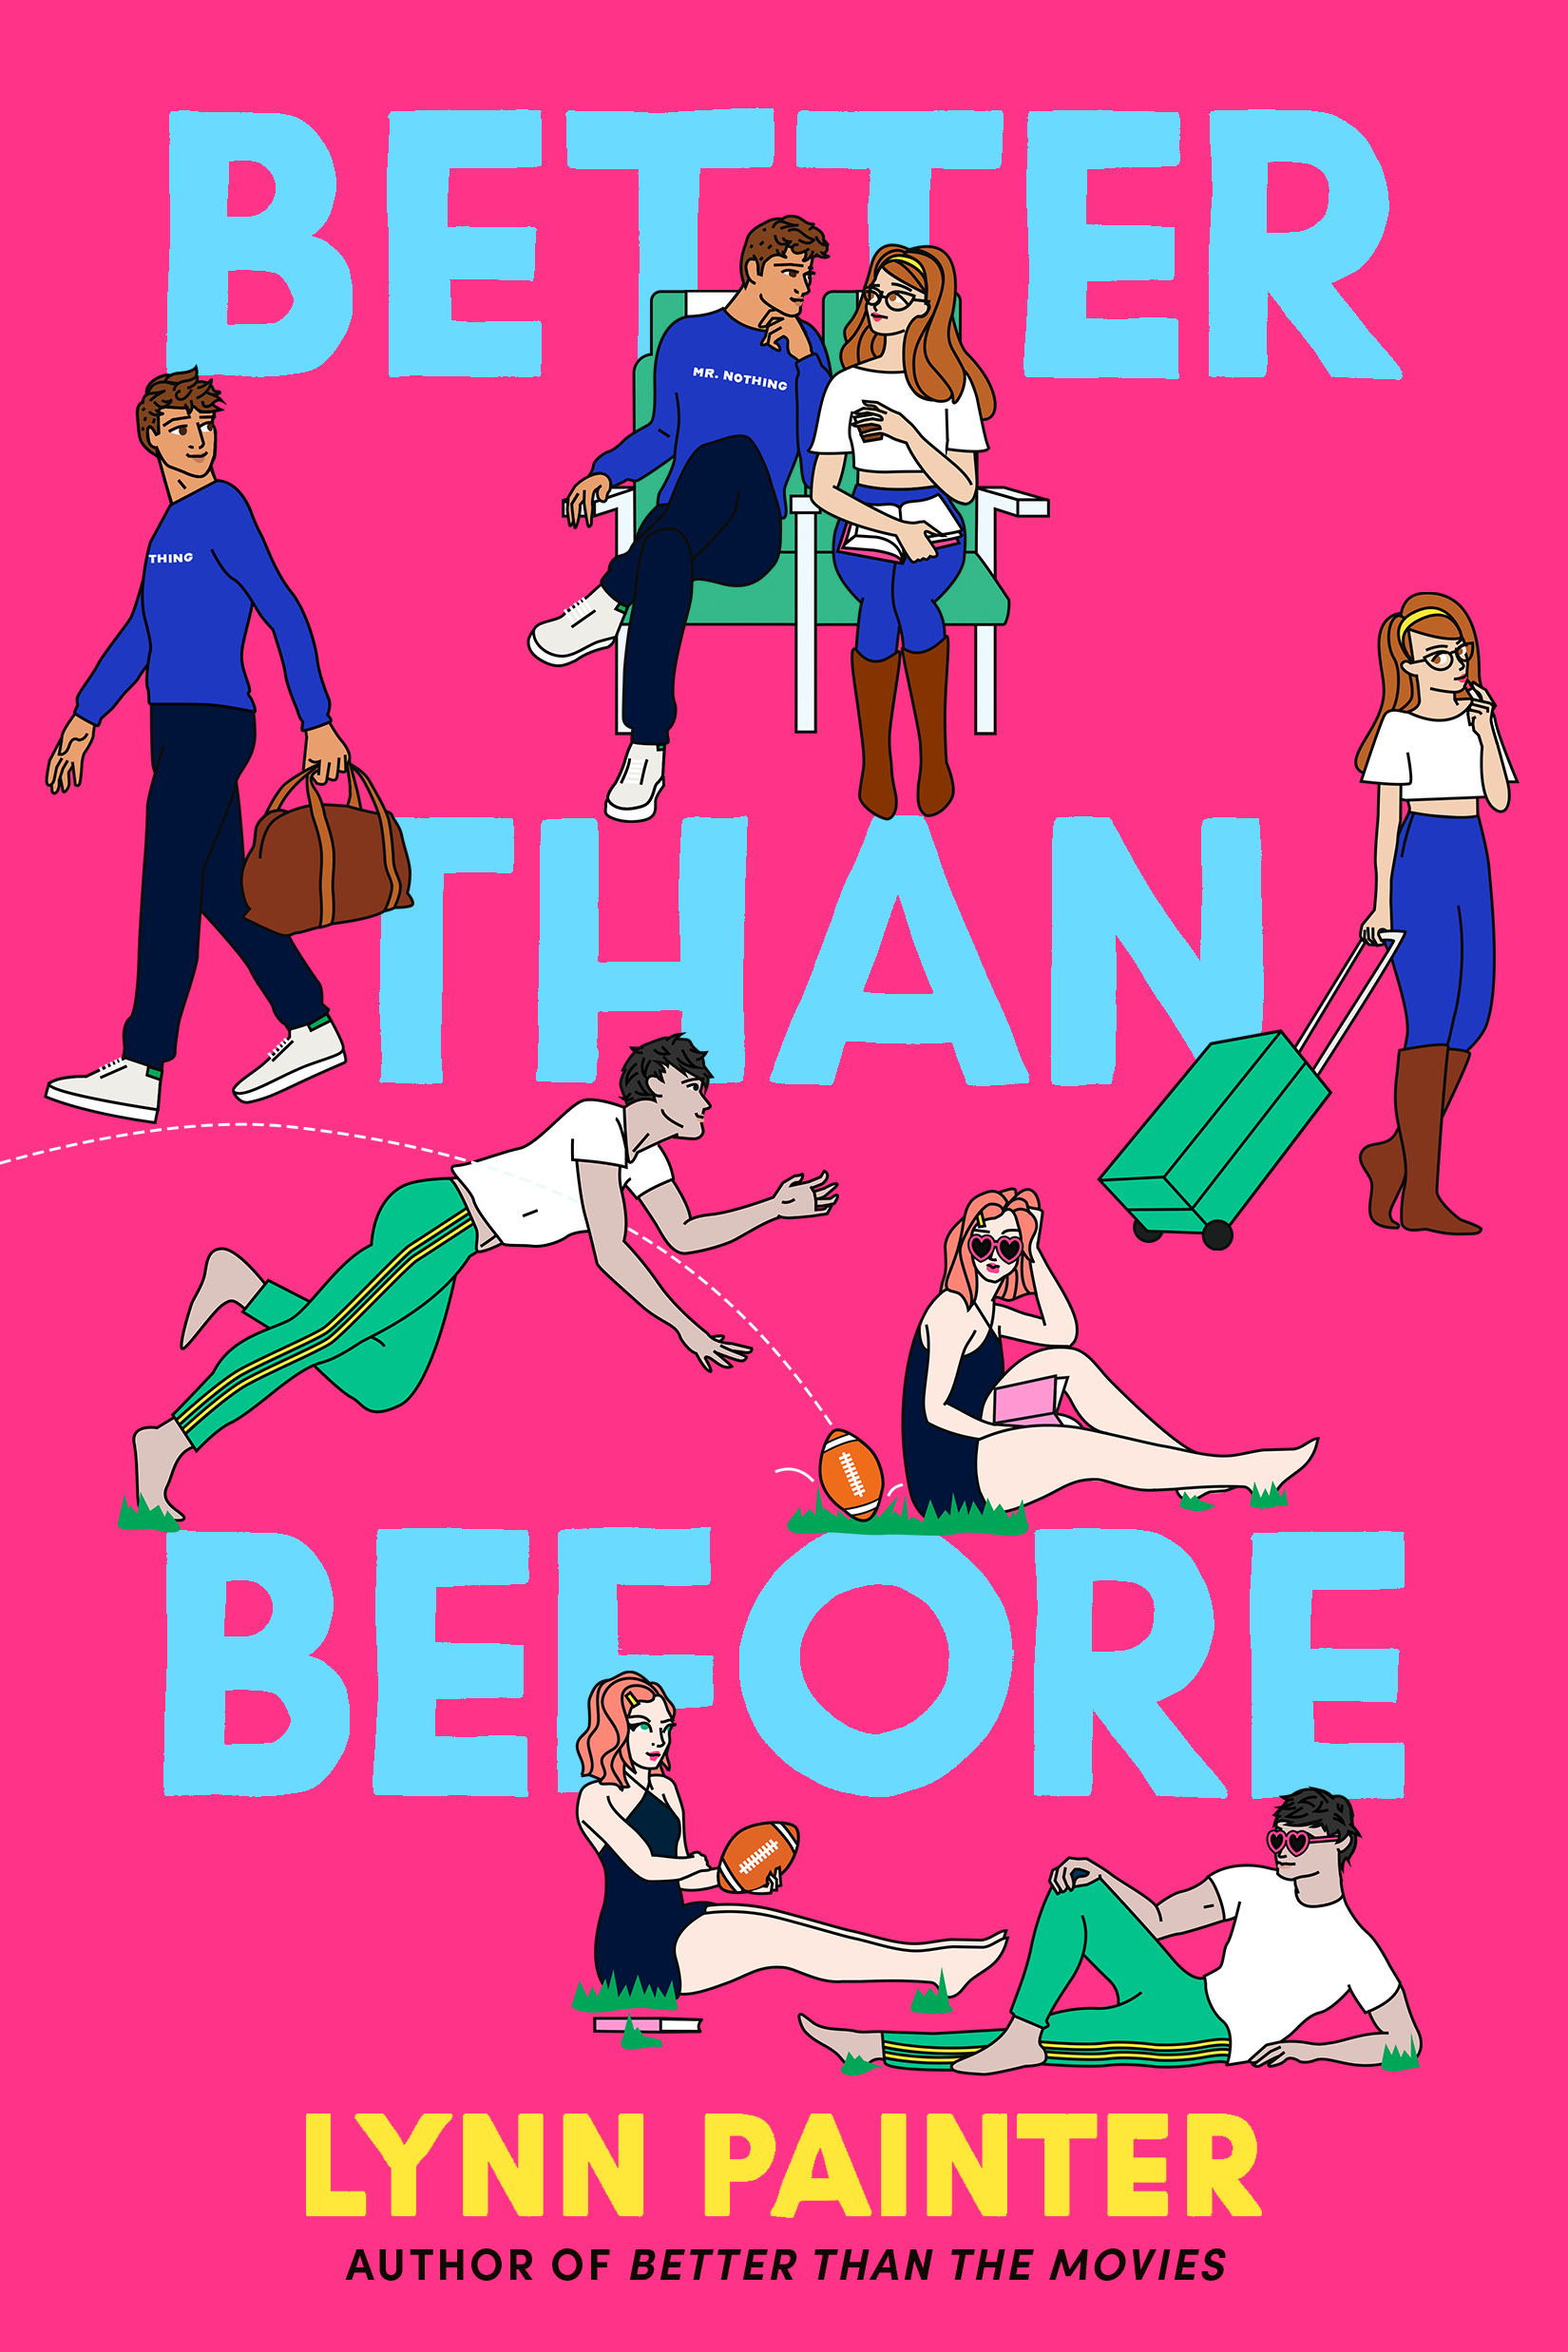 Better Than Before cover